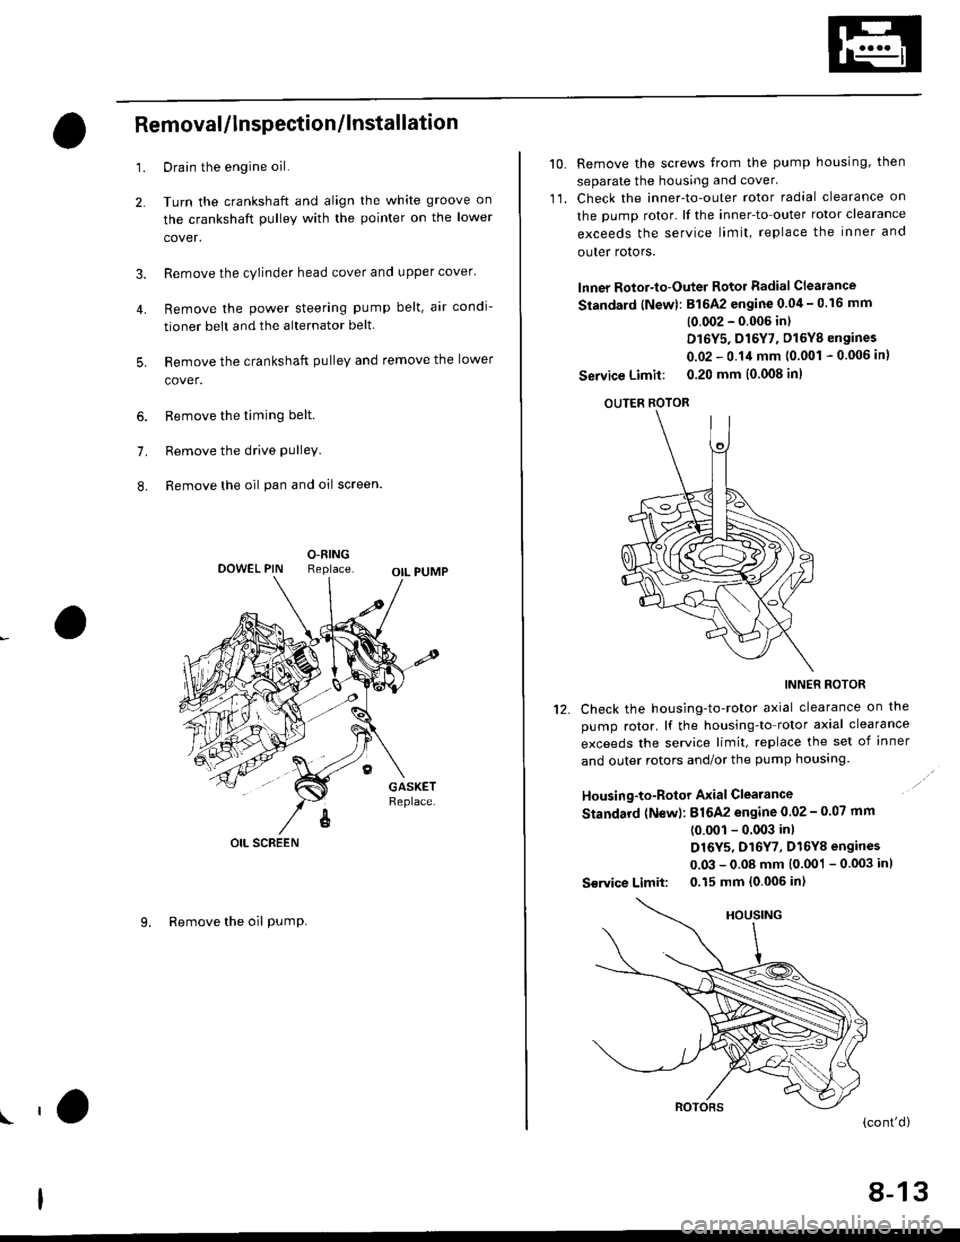 HONDA CIVIC 1998 6.G Workshop Manual 4.
Removal/lnspection/lnstallation
2.
3.
1.
5.
6.
1.
8.
Drain the engine oil.
Turn the crankshaft and align the white groove on
the crankshaft pulley with the pointer on the lower
cover.
Remove the cy